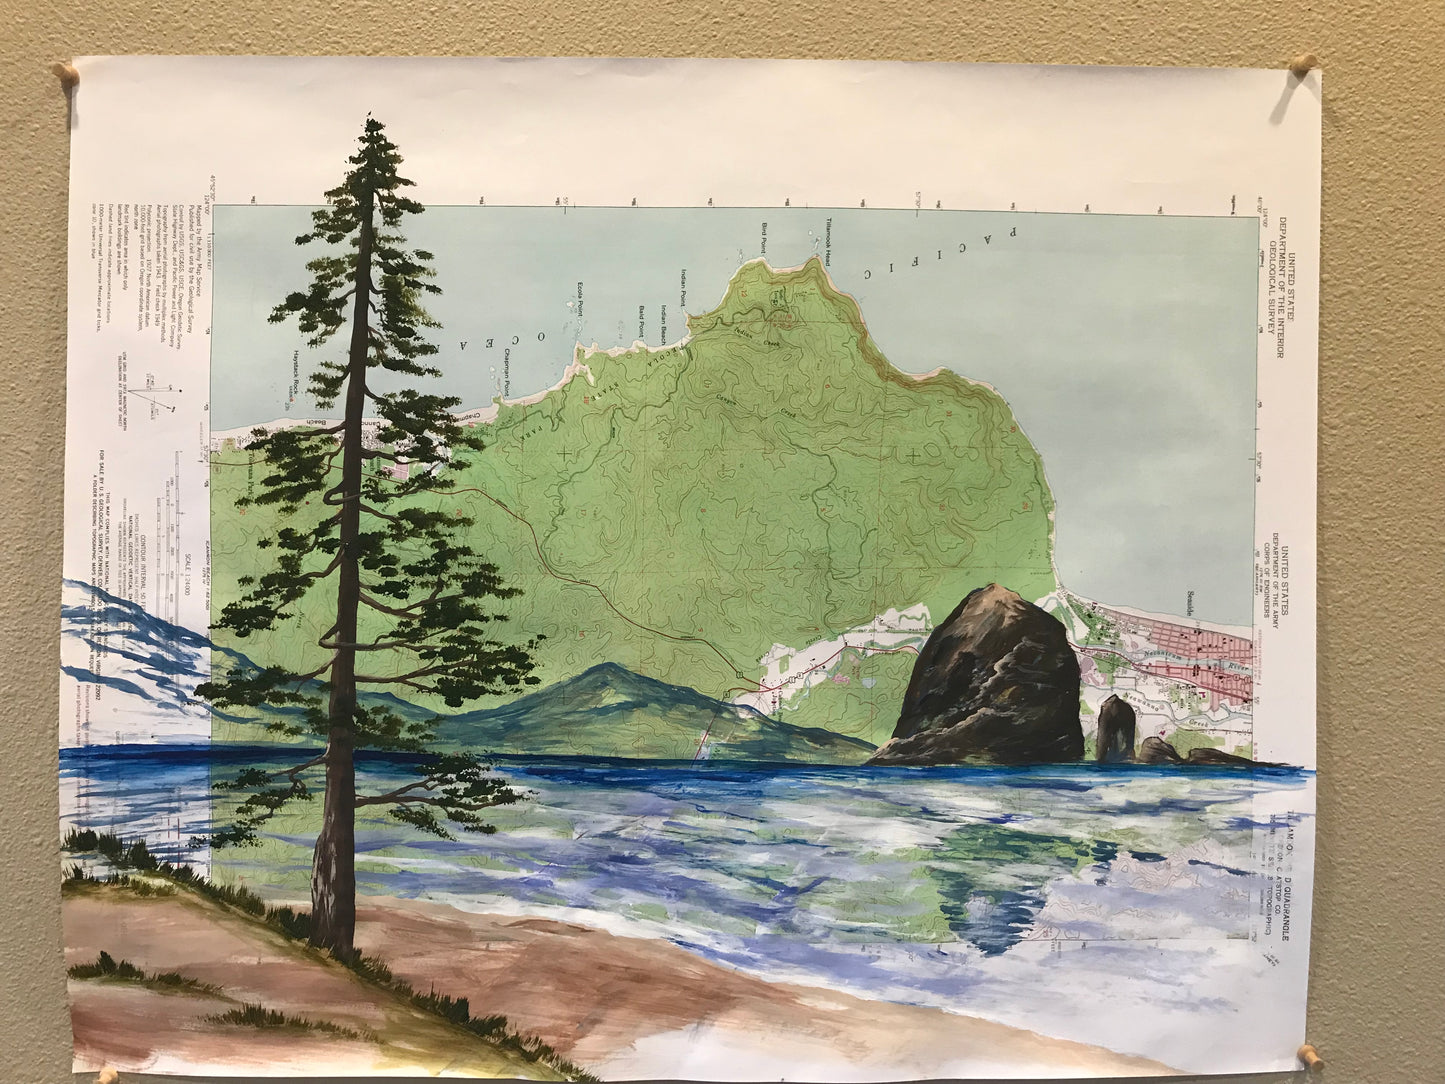 Cannon beach haystack rock map painting